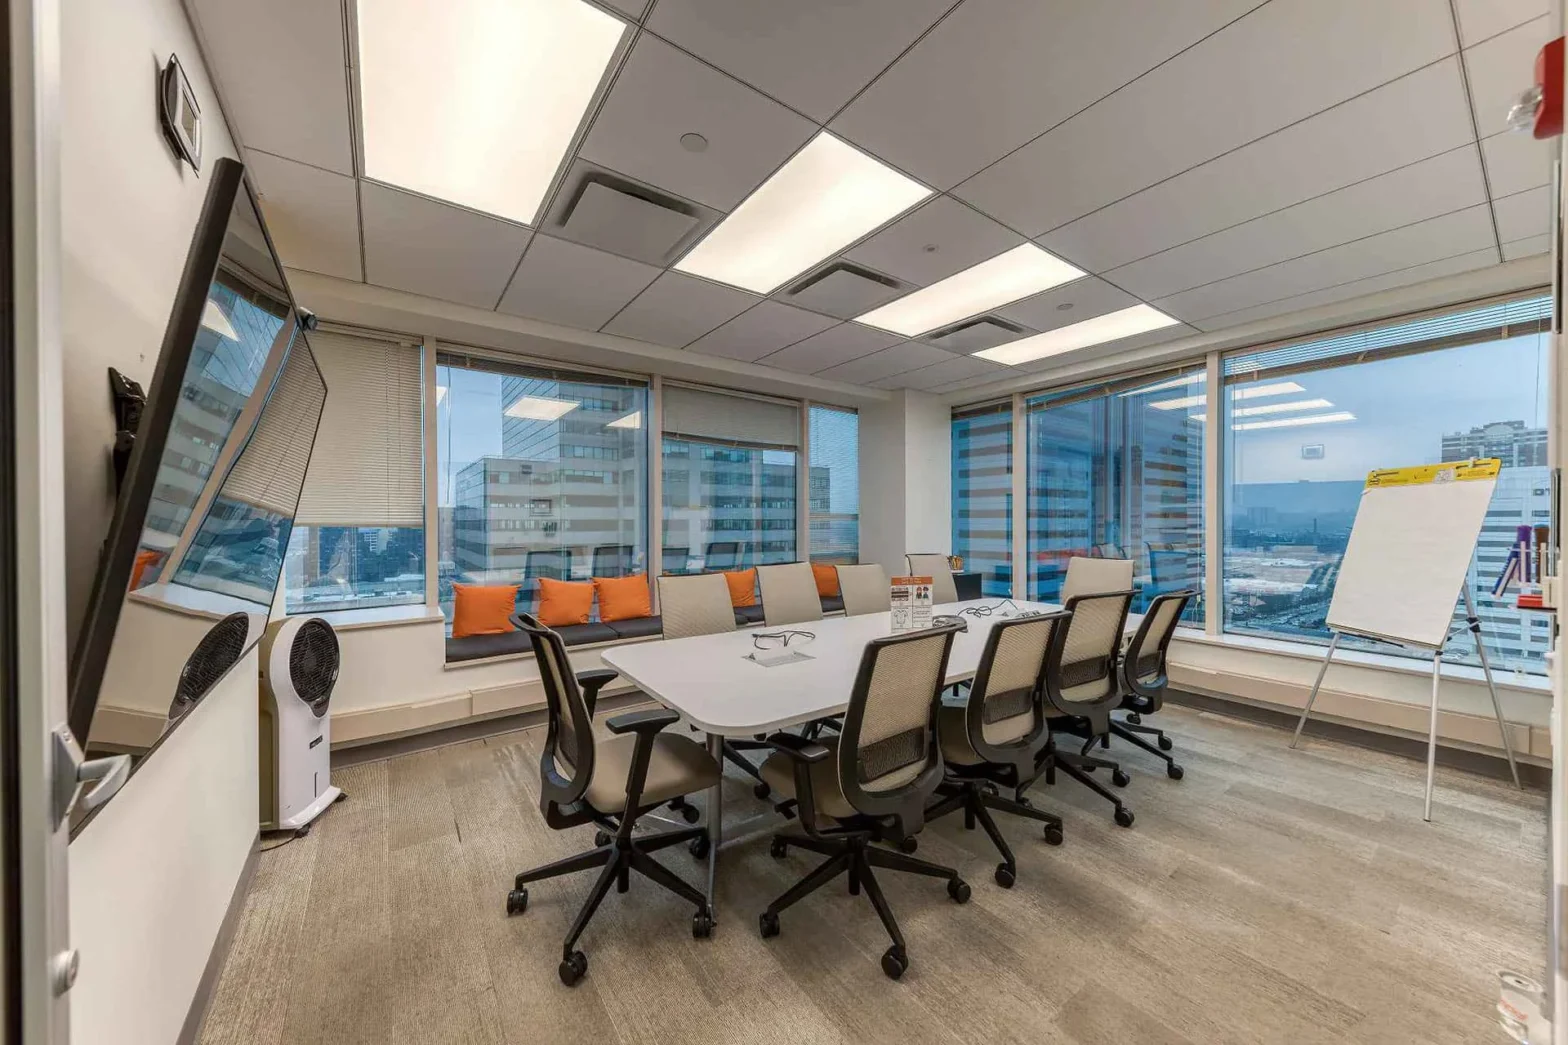 Step into the world of shared office space for cost-effective solutions, flexible workspaces, and endless collaboration possibilities.